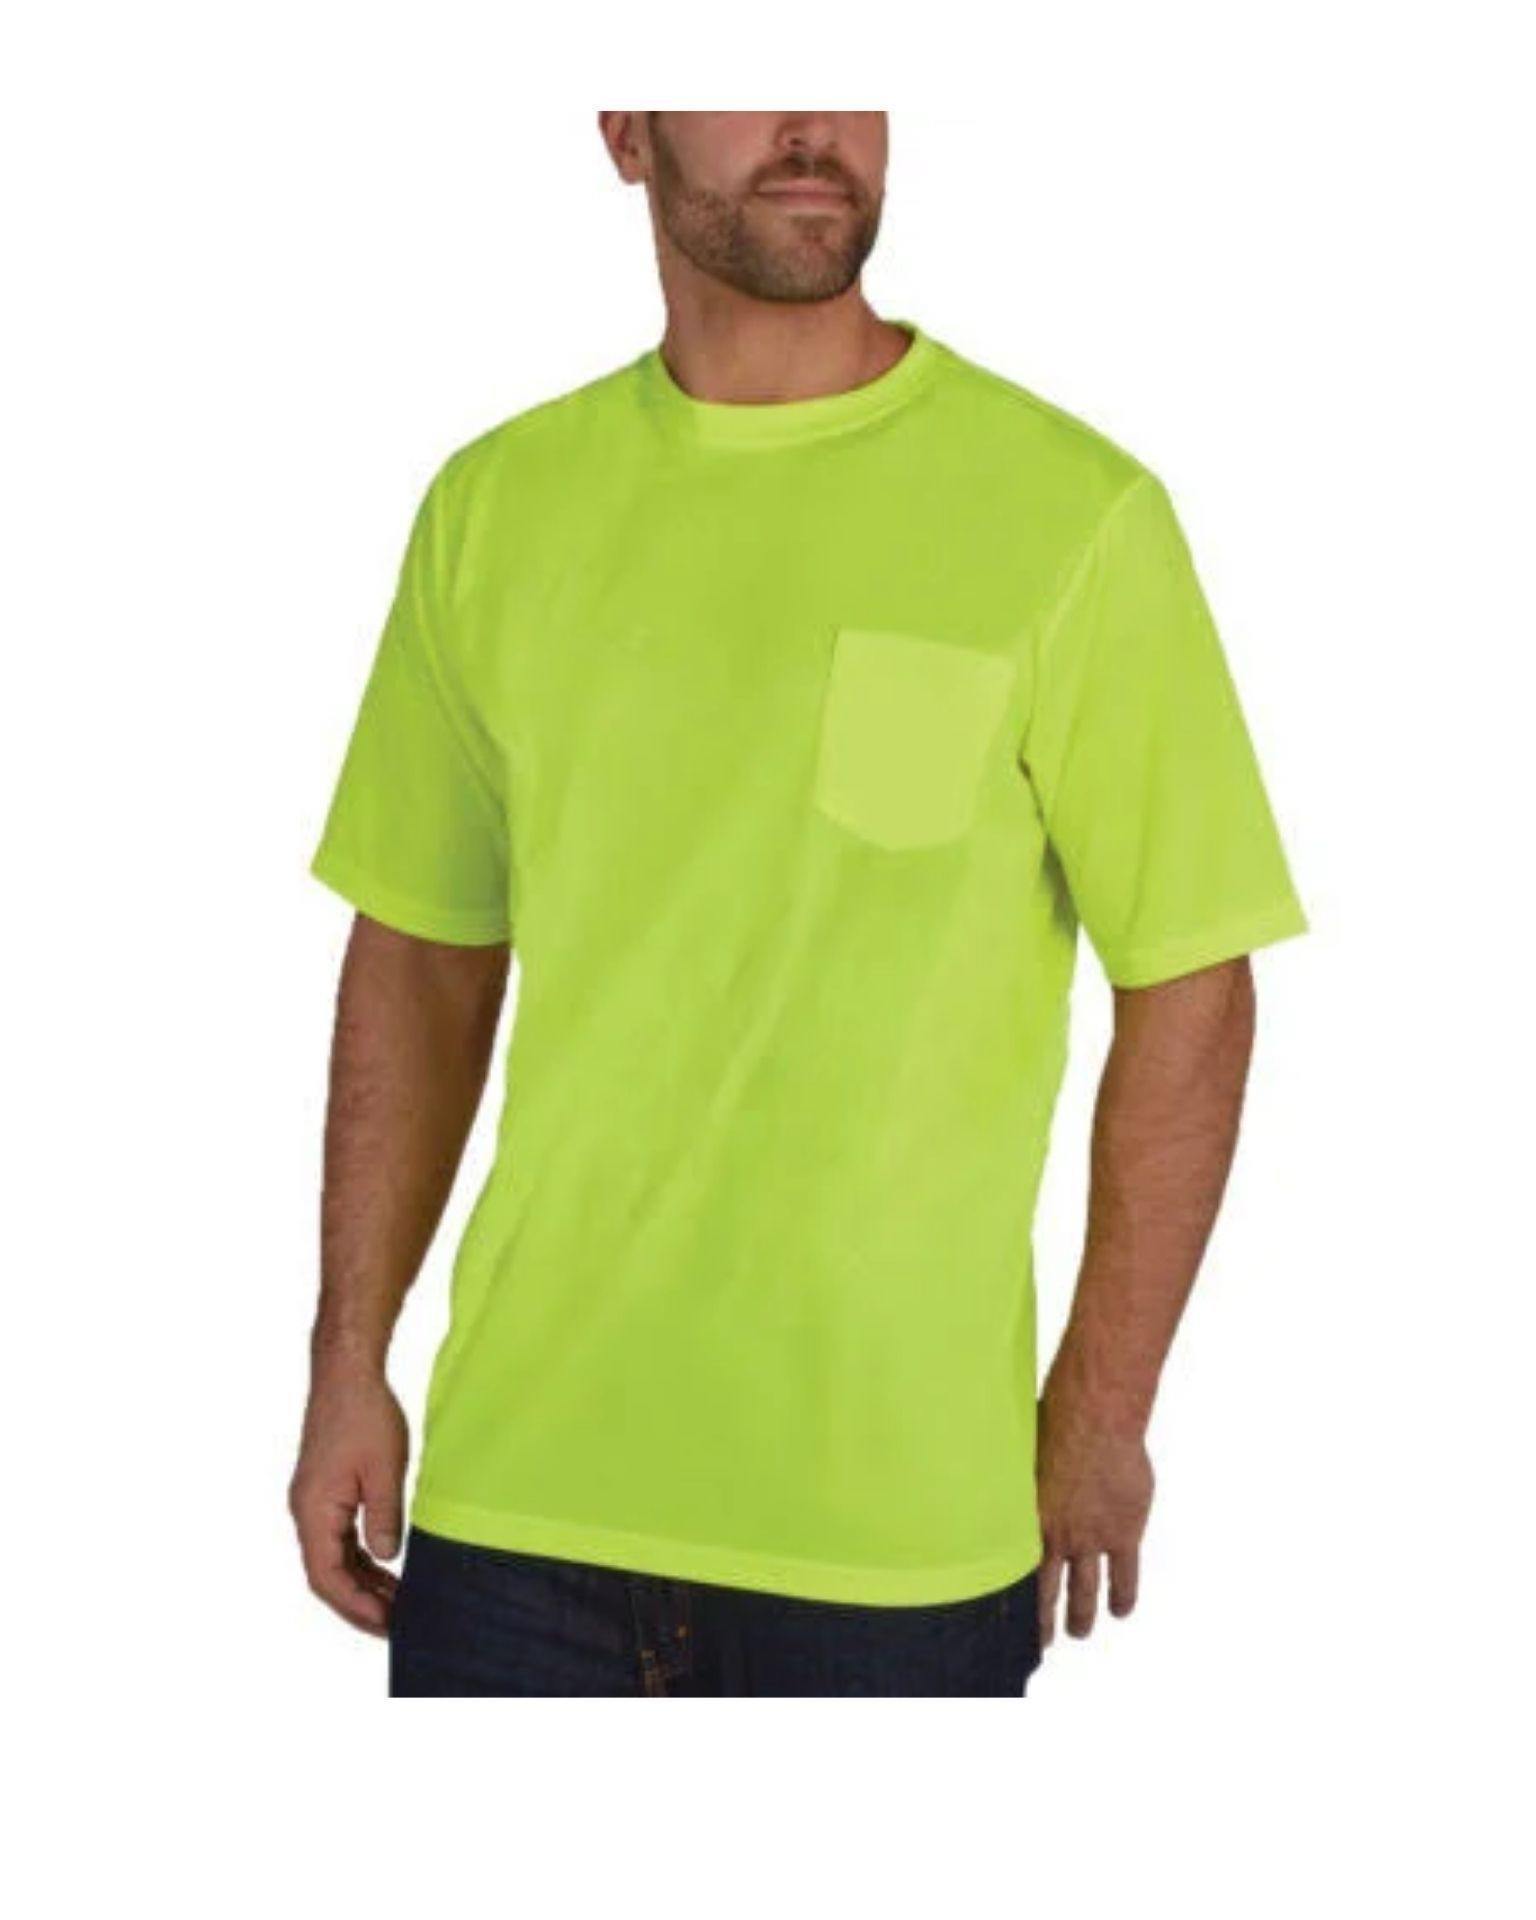 UHV866 HiVis Short Sleeve Shirt - Protected with PERIMETER™ Insect Guard